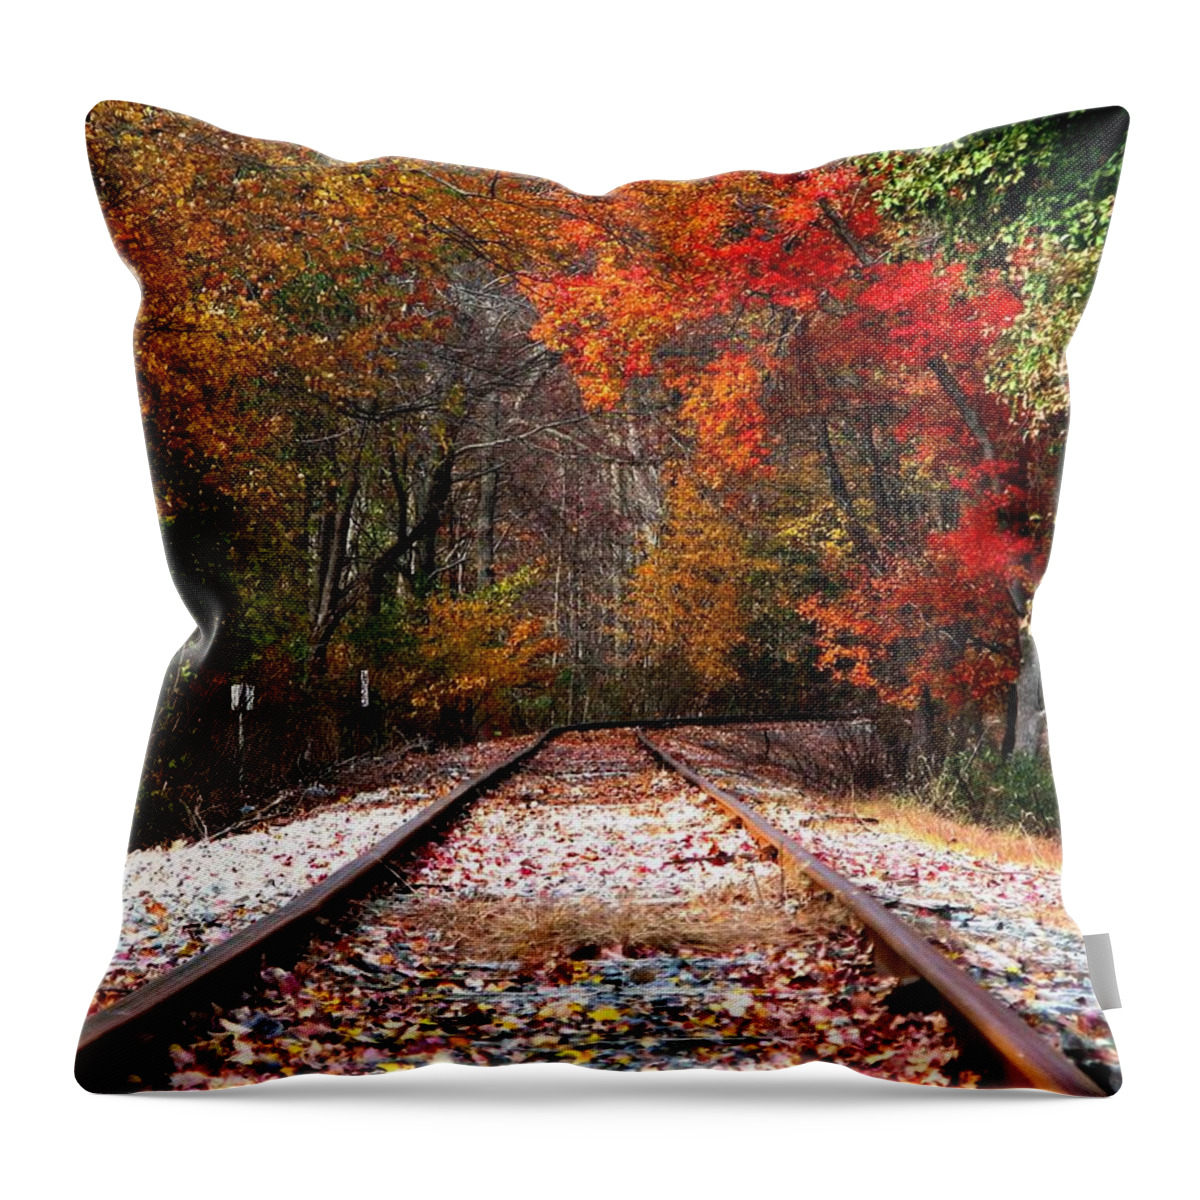 Tracks Throw Pillow featuring the photograph Lead Me Home by Angela Davies